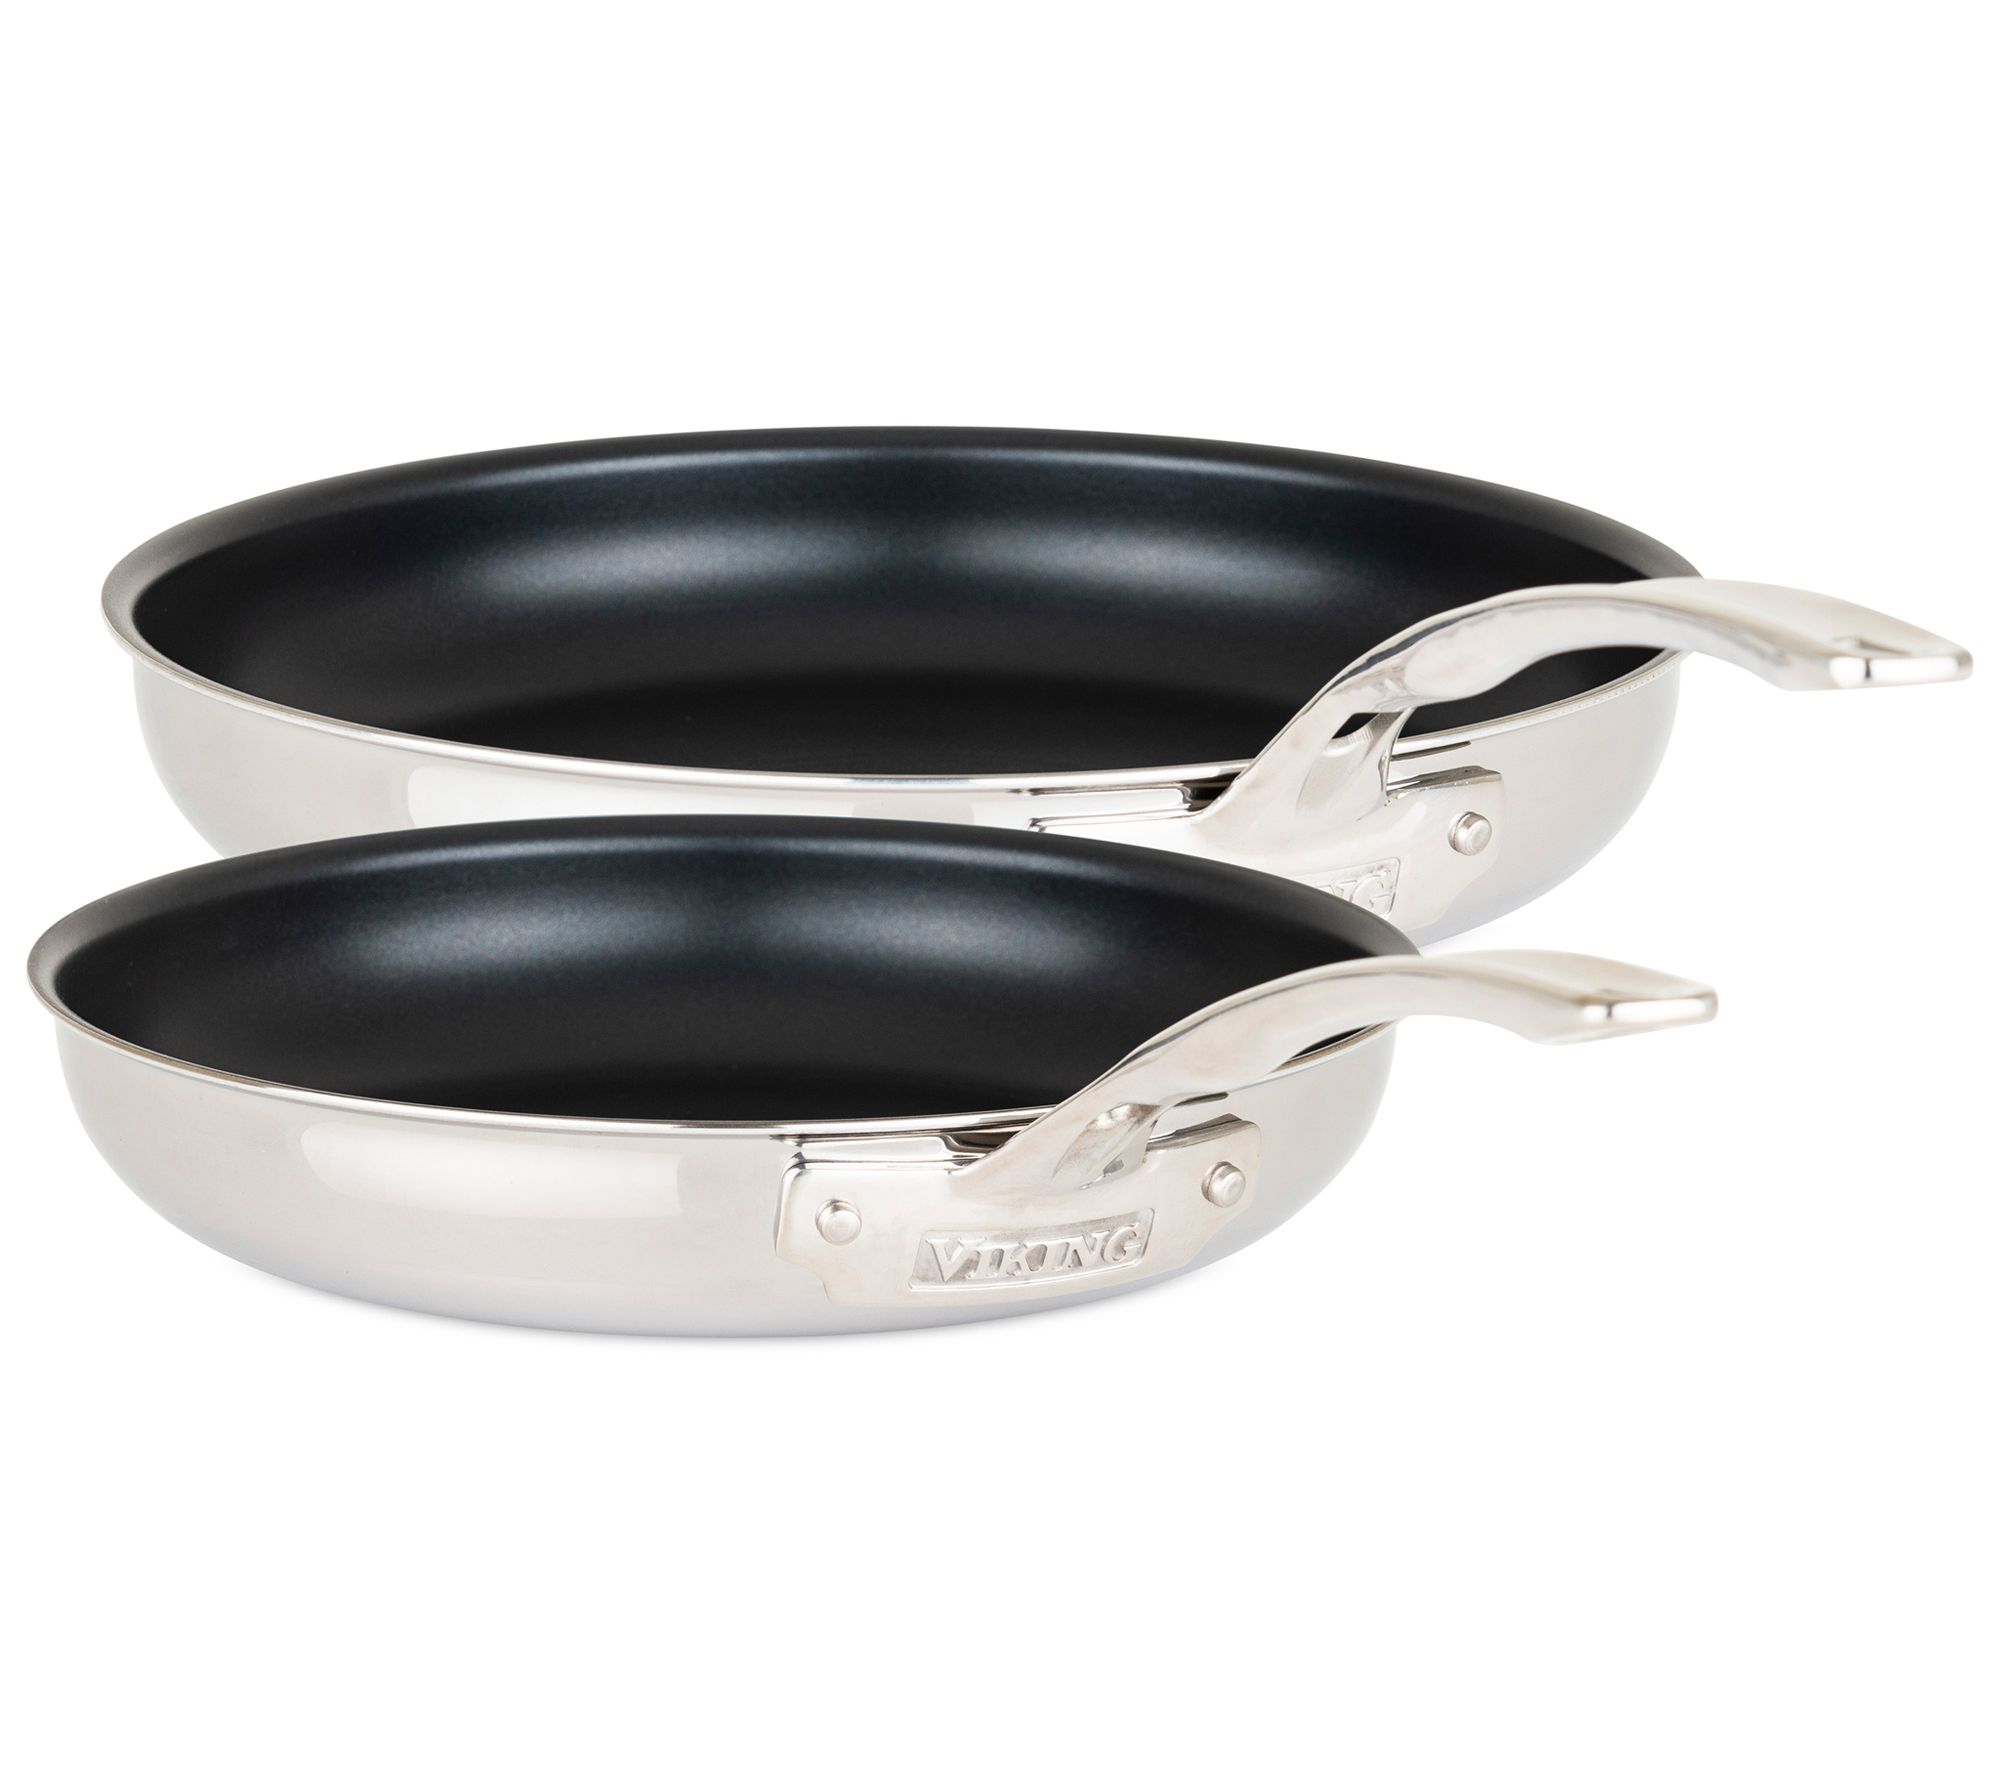 Viking Hard Anodized Nonstick Fry Pan - 12 in.